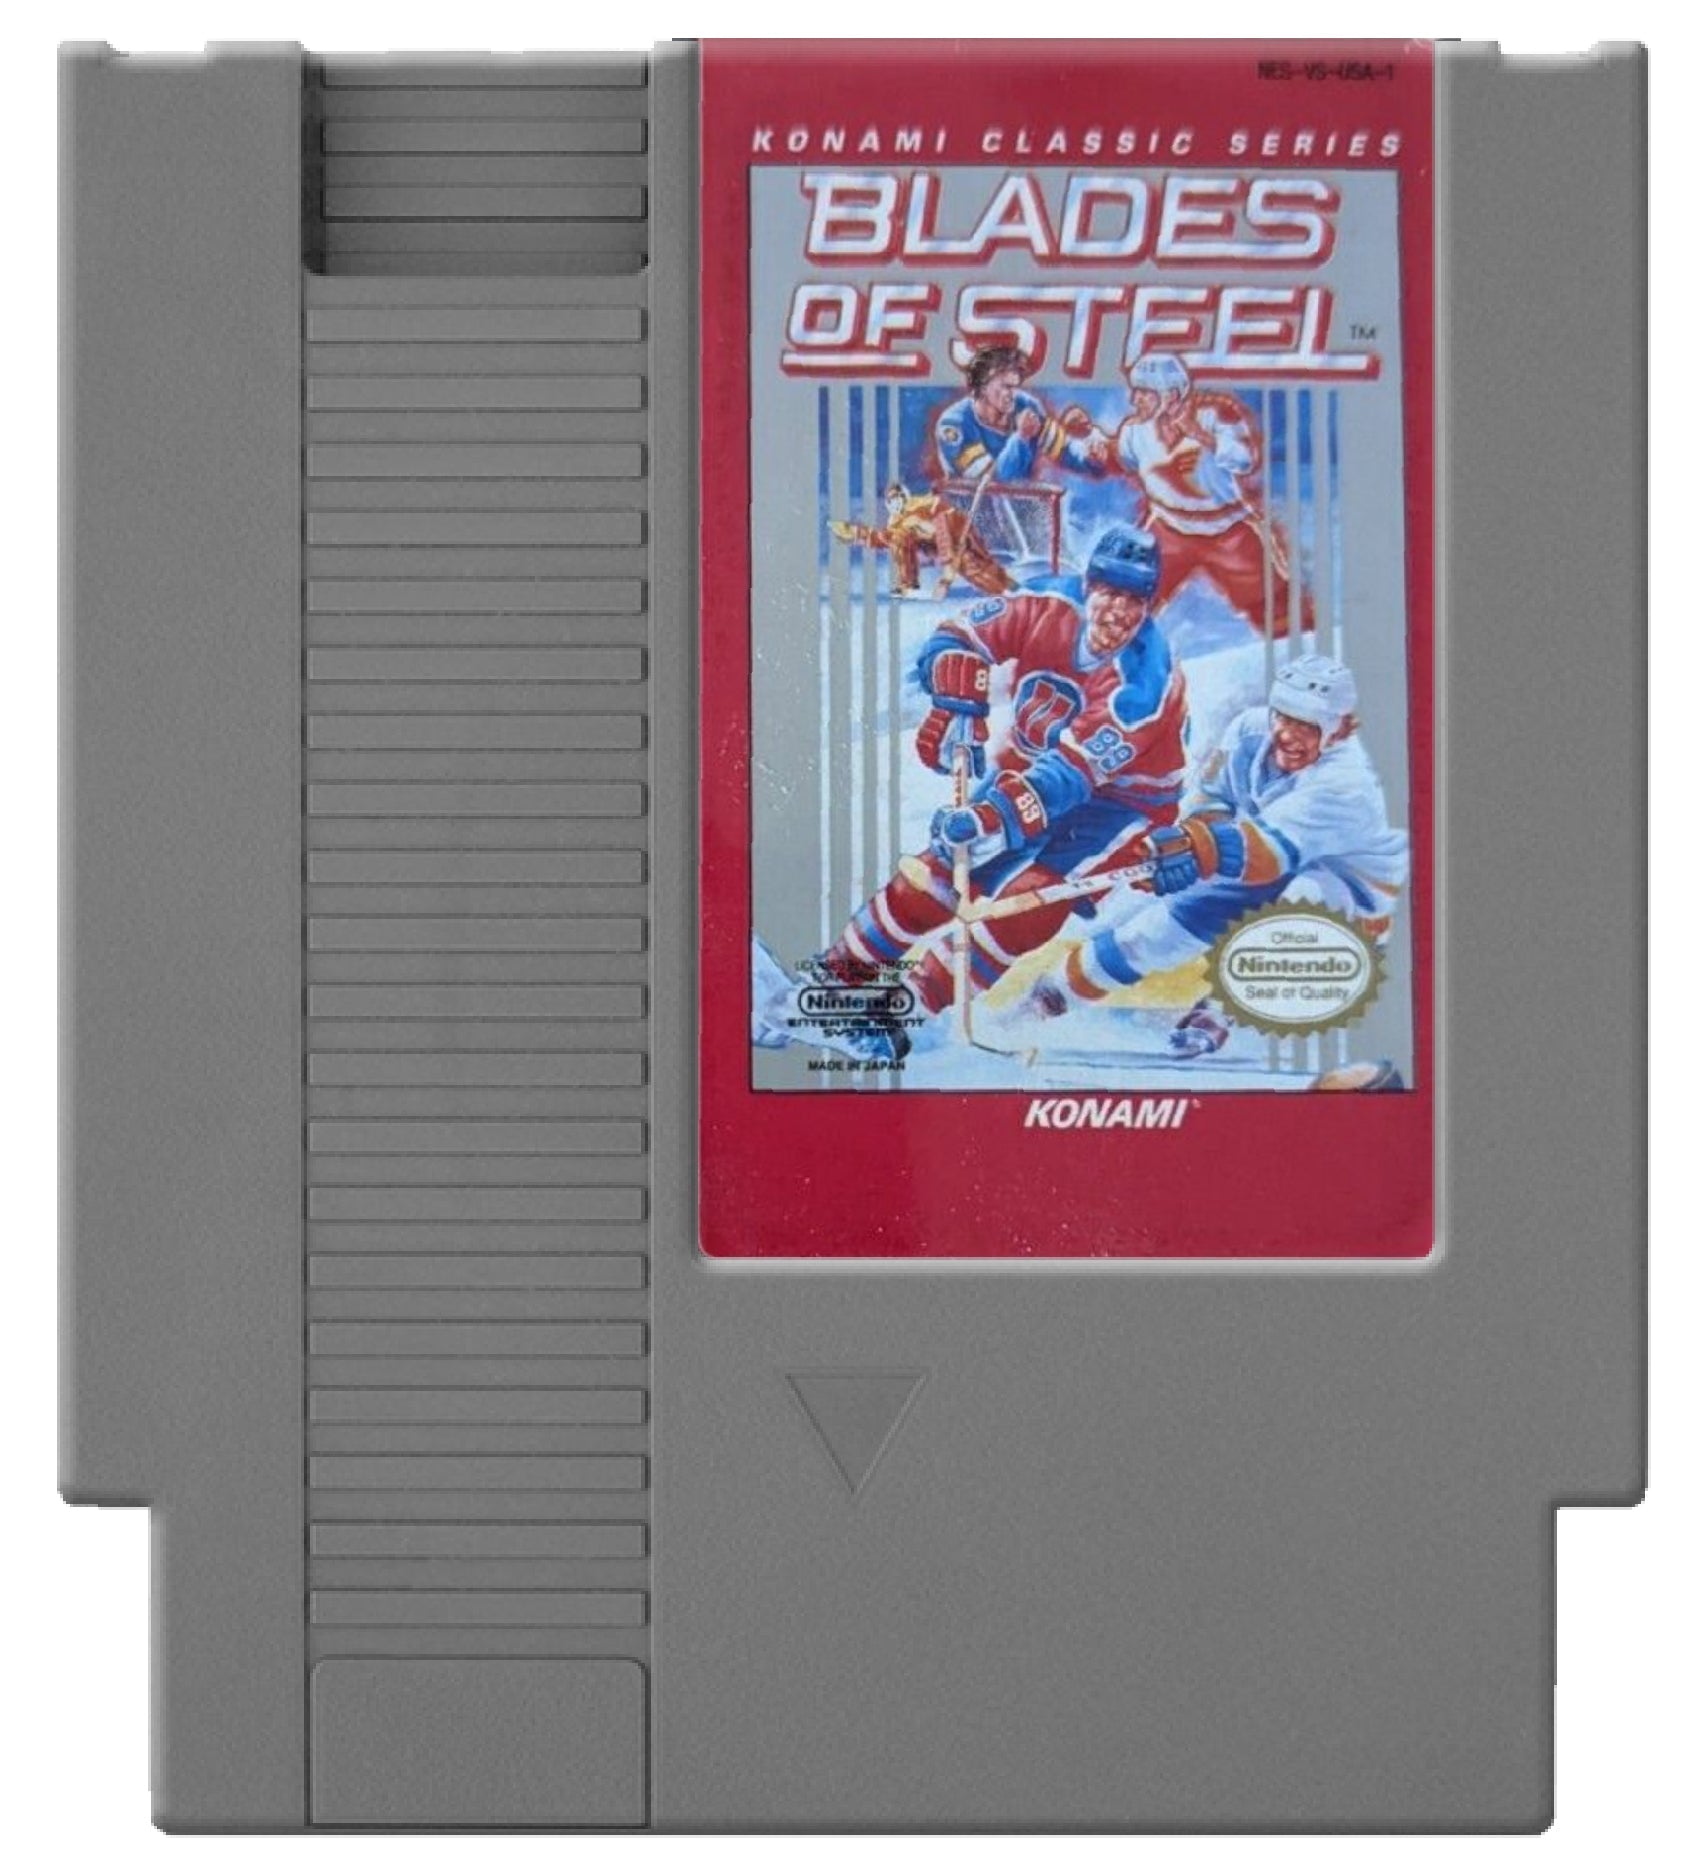 Blades of Steel Classic Series  Cover Art and Product Photo